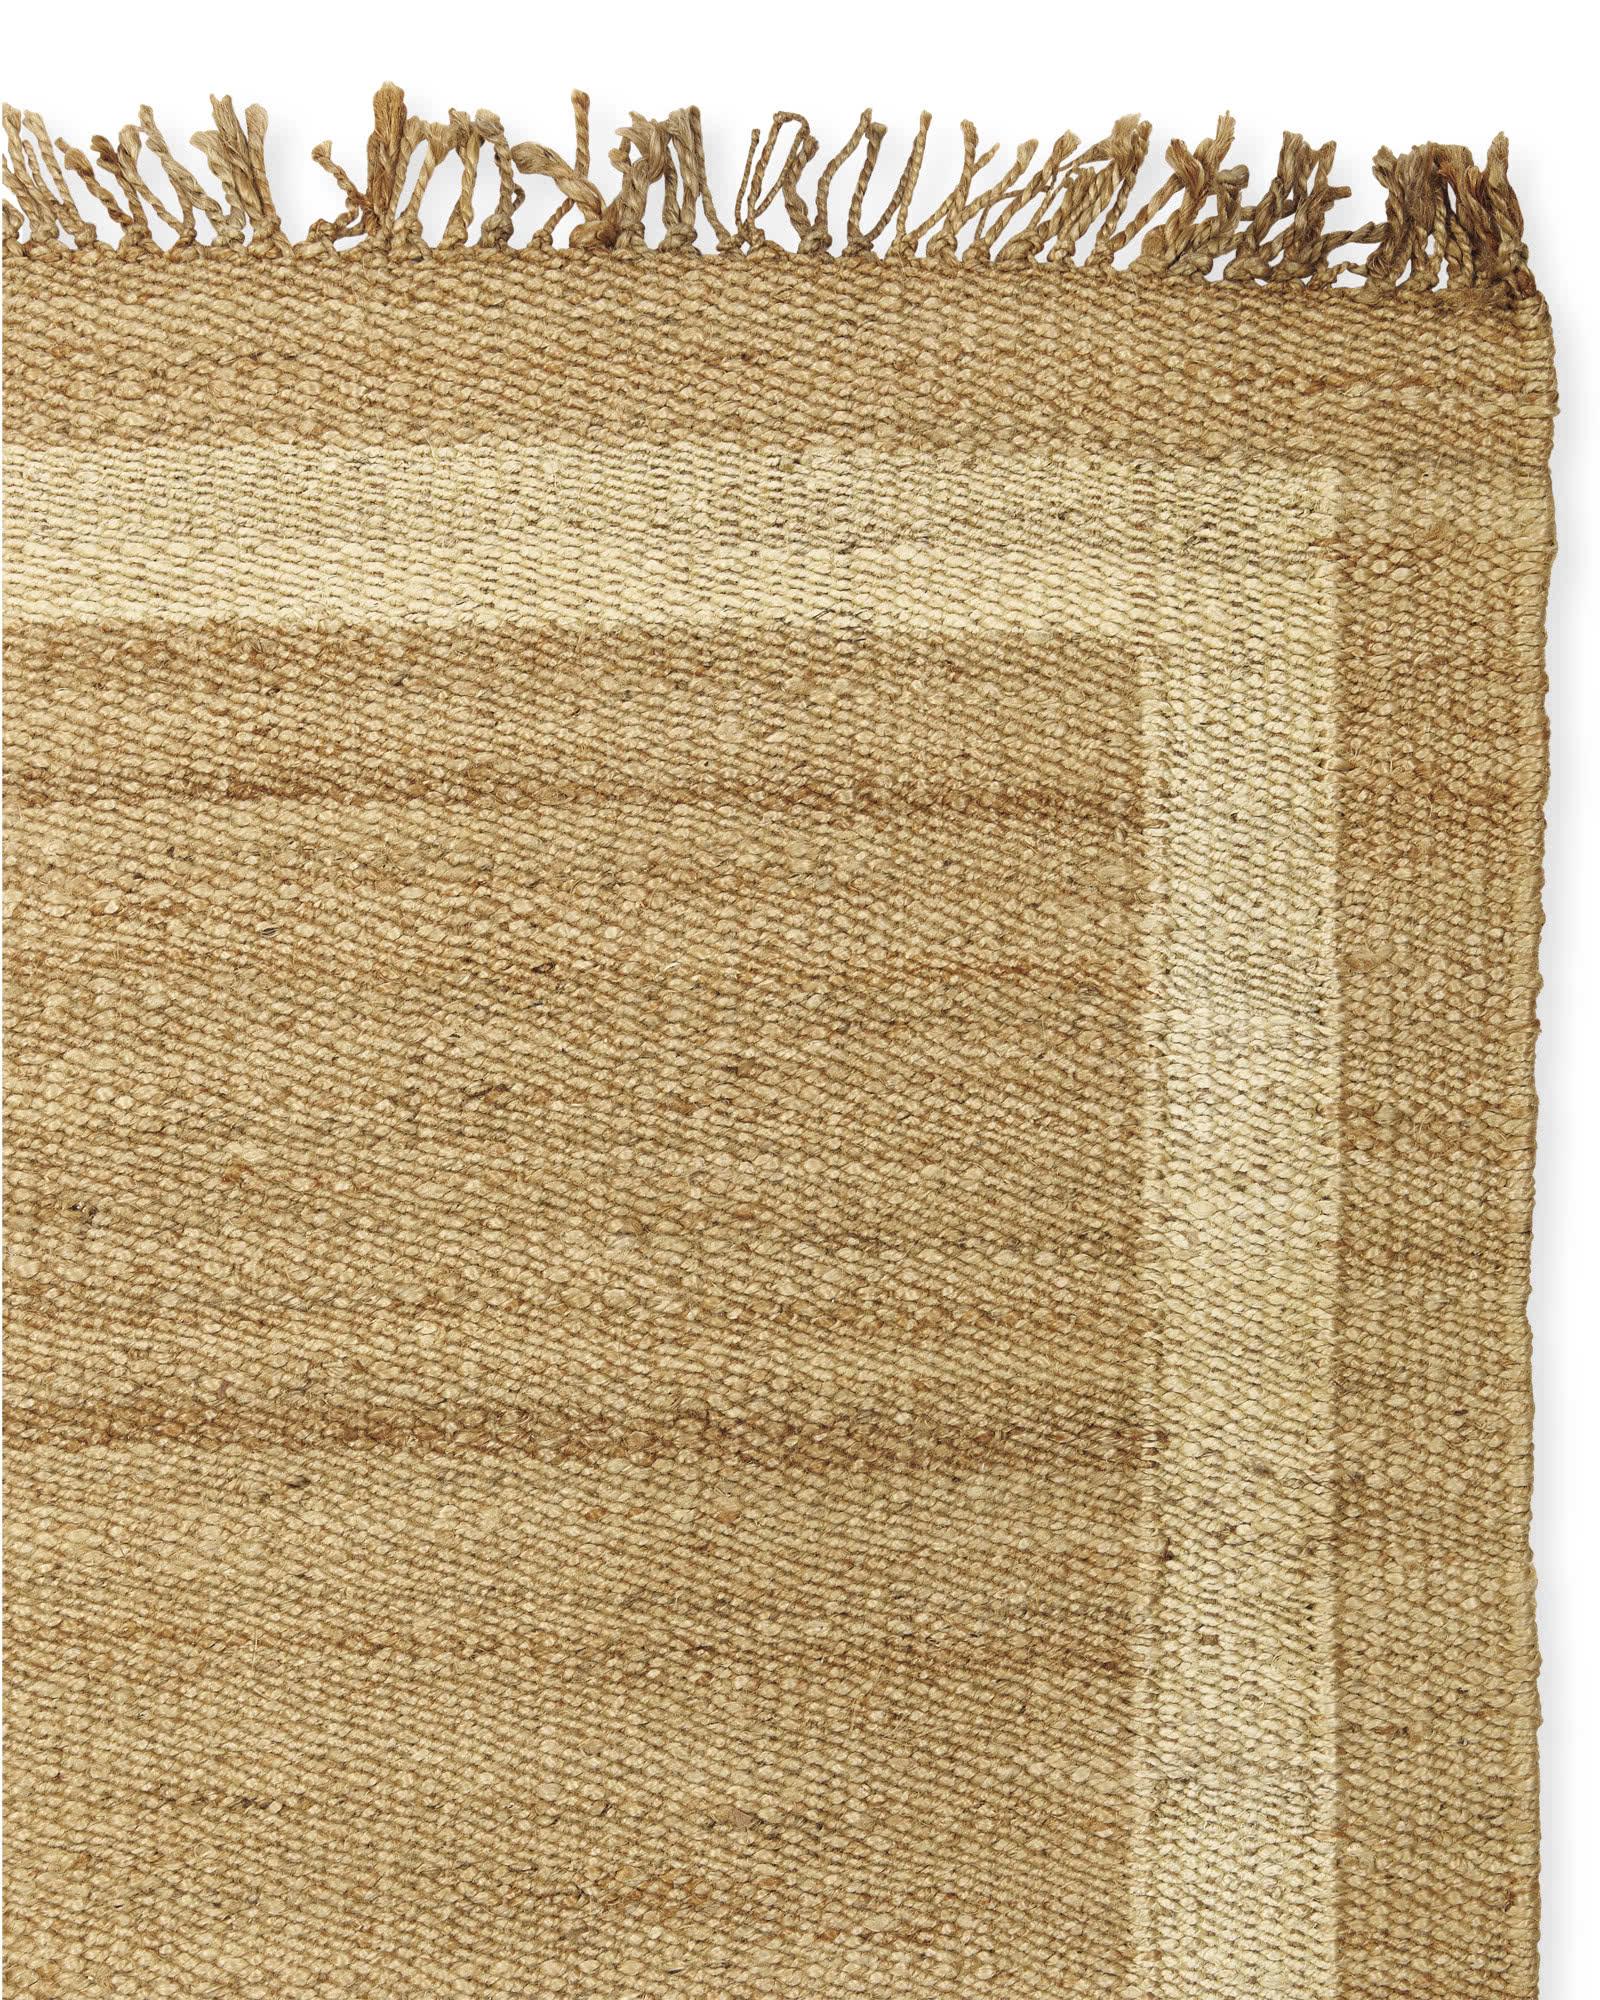 Jute Border Rug in Ivory White, 8' x 10' | Serena & Lily